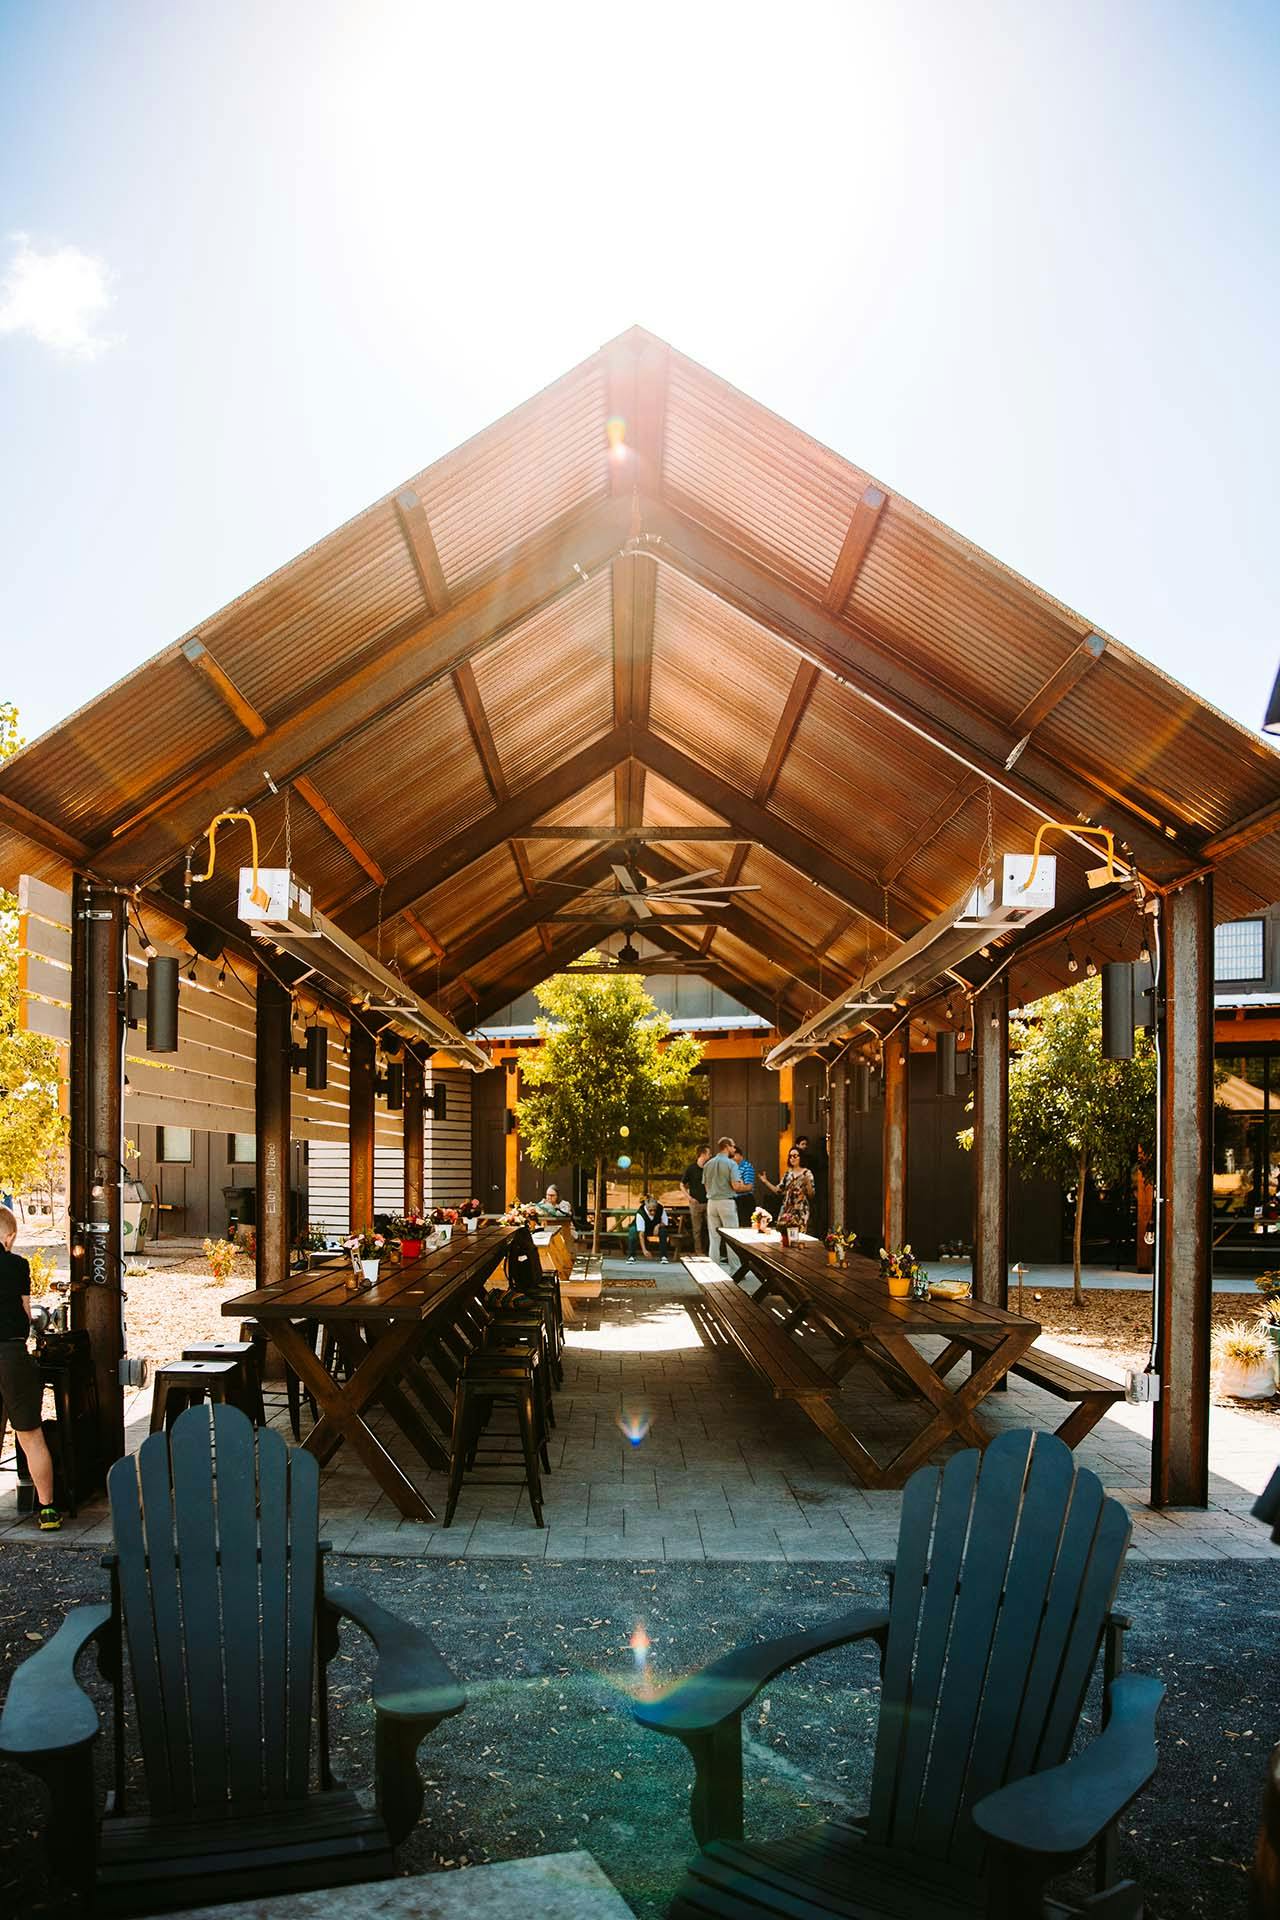 long tables outdoors under outdoor seating area roof